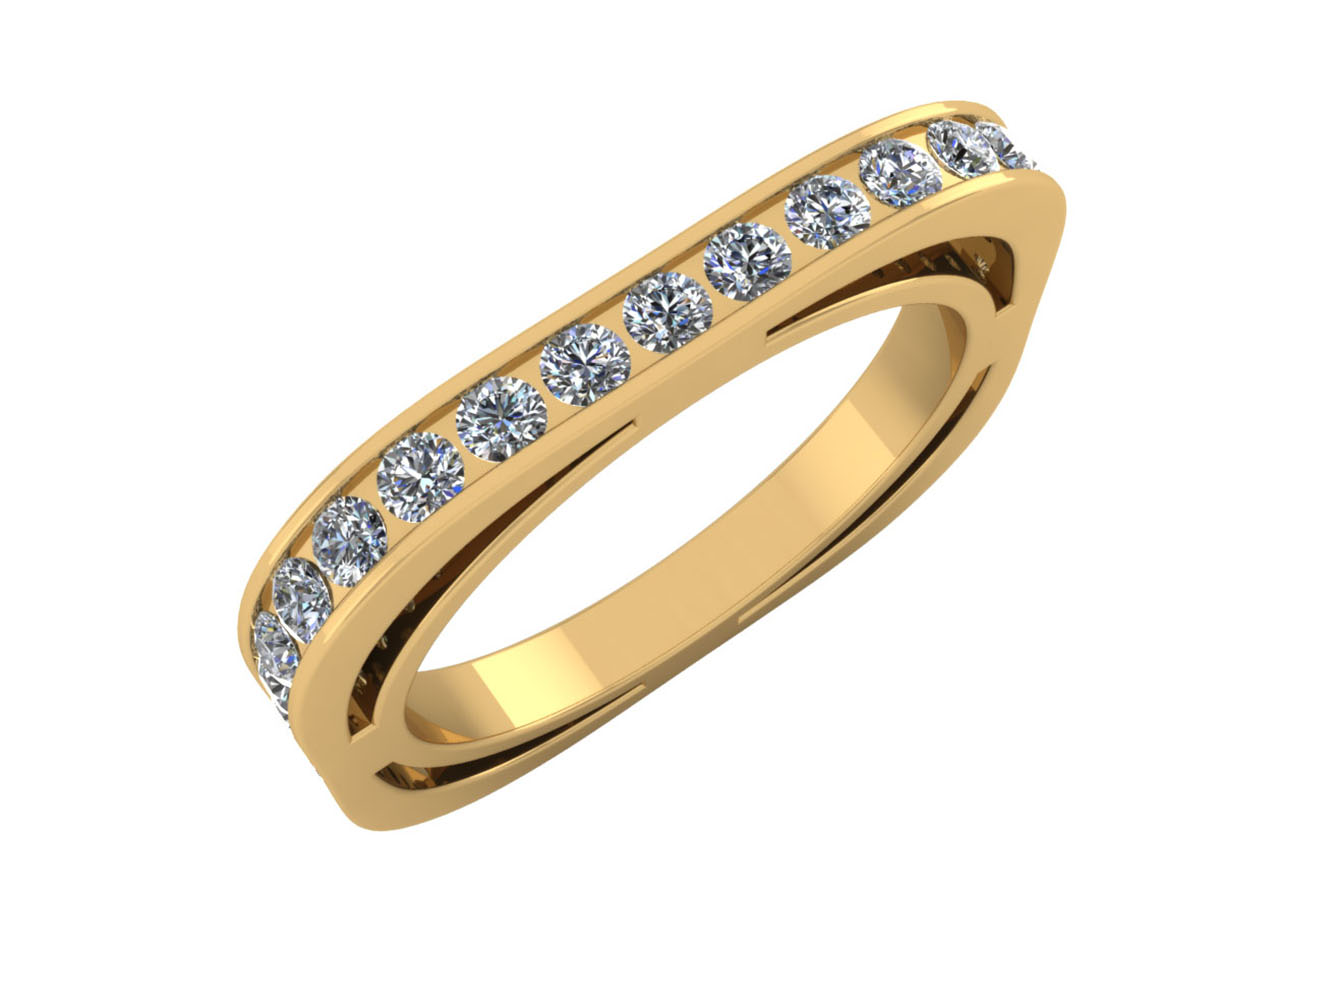 Jewel We Sell 2.00Ct Round Cut Diamond Euro Style Square Anniversary Wedding Eternity Band Ring 18k Gold G SI1